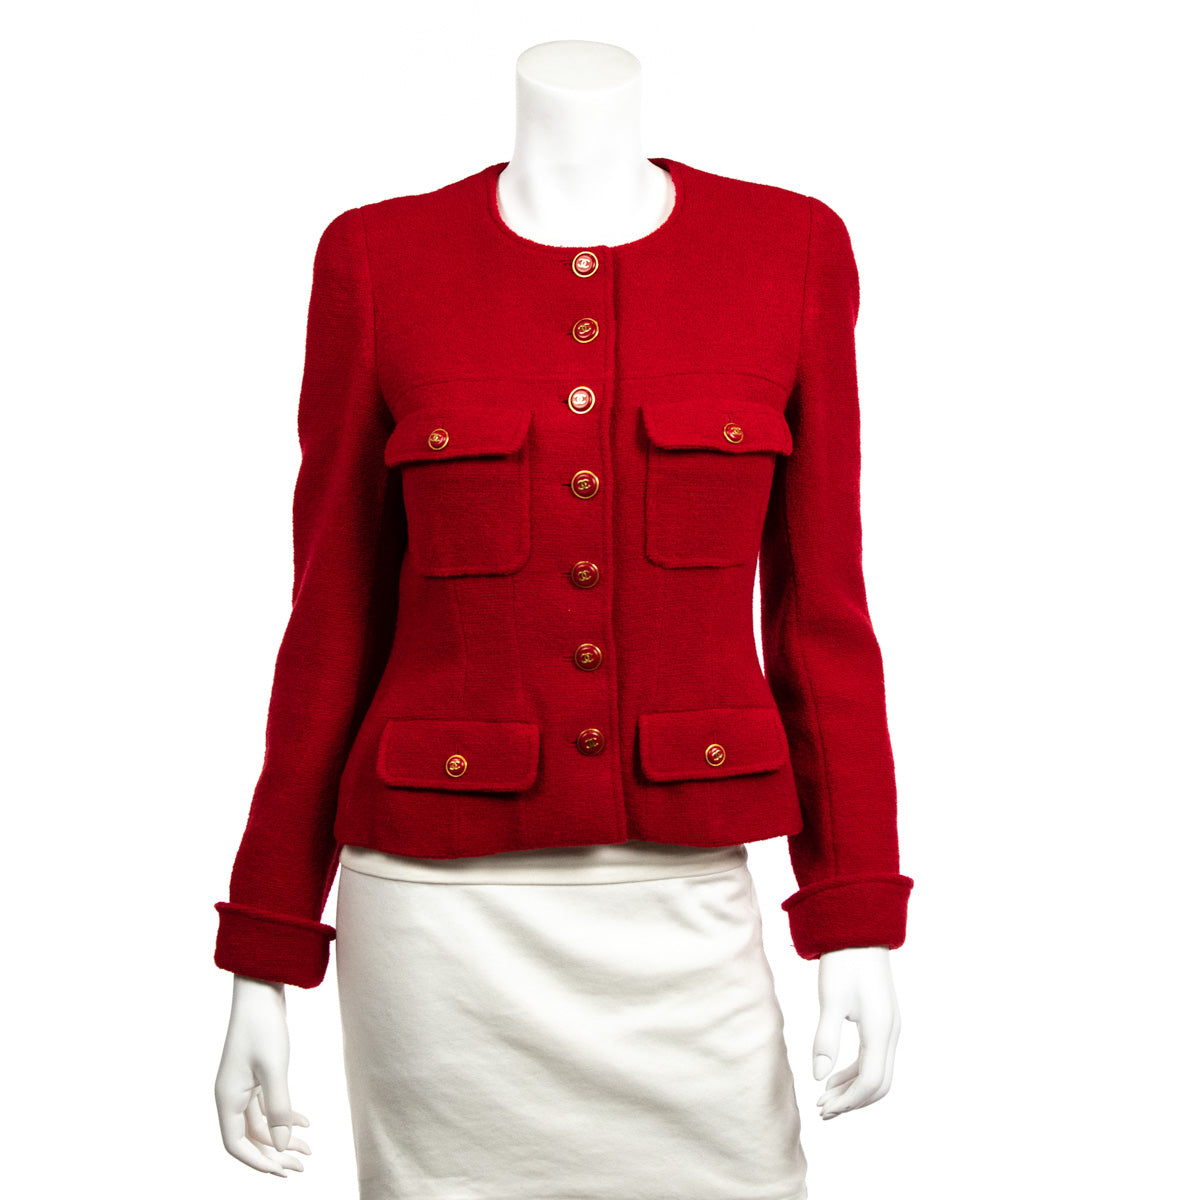 Chanel Red Boucle Jacket - Preloved Chanel Jackets Canada – Love